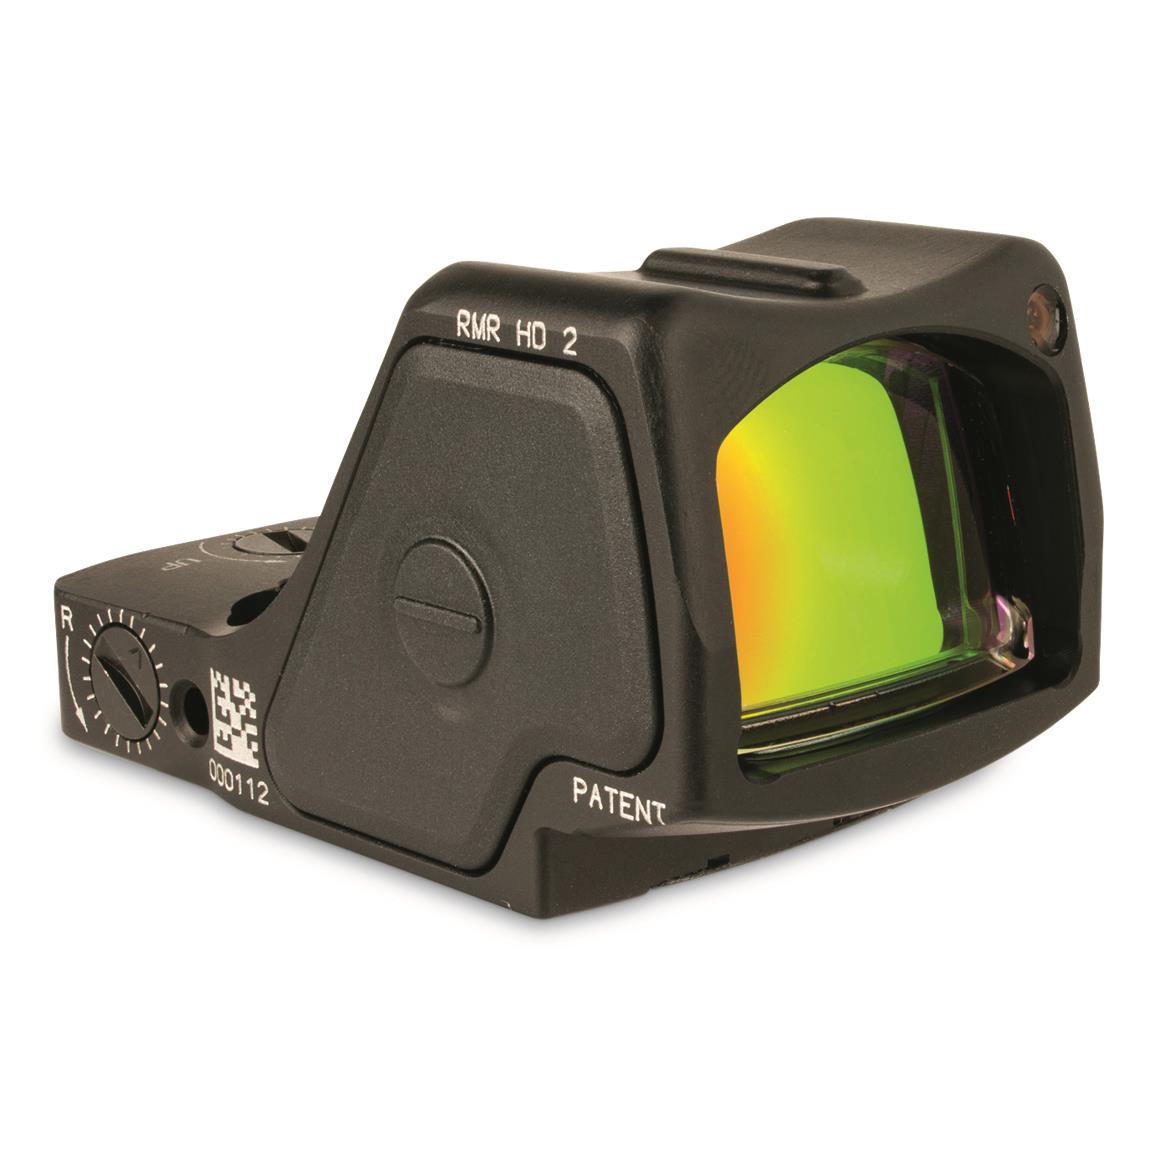 Trijicon RMR HD Adjustable LED Red Dot Sight, 3.25 MOA Reticle with 55 MOA Circle